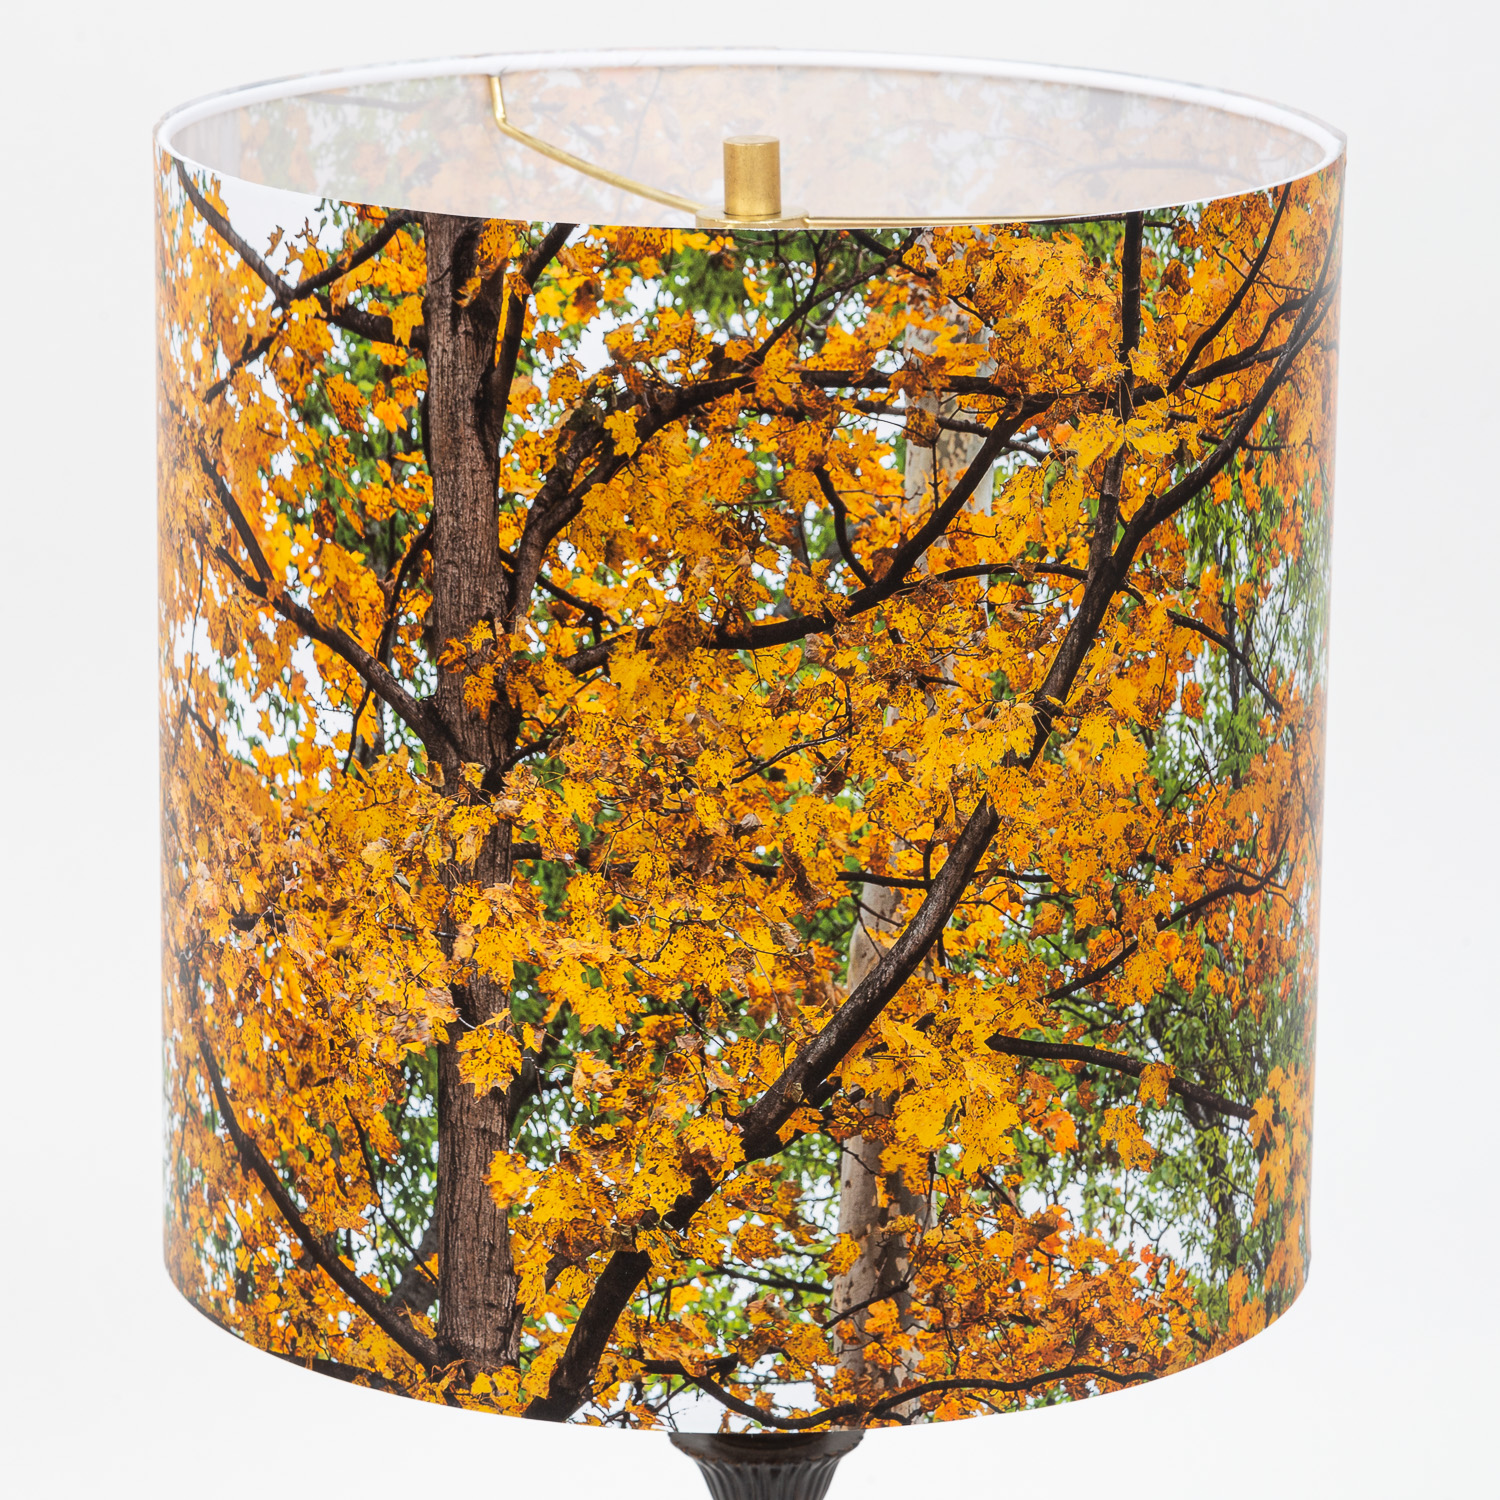 156: Maple tree in fall -- Photo on Lamp shade by David Elmore